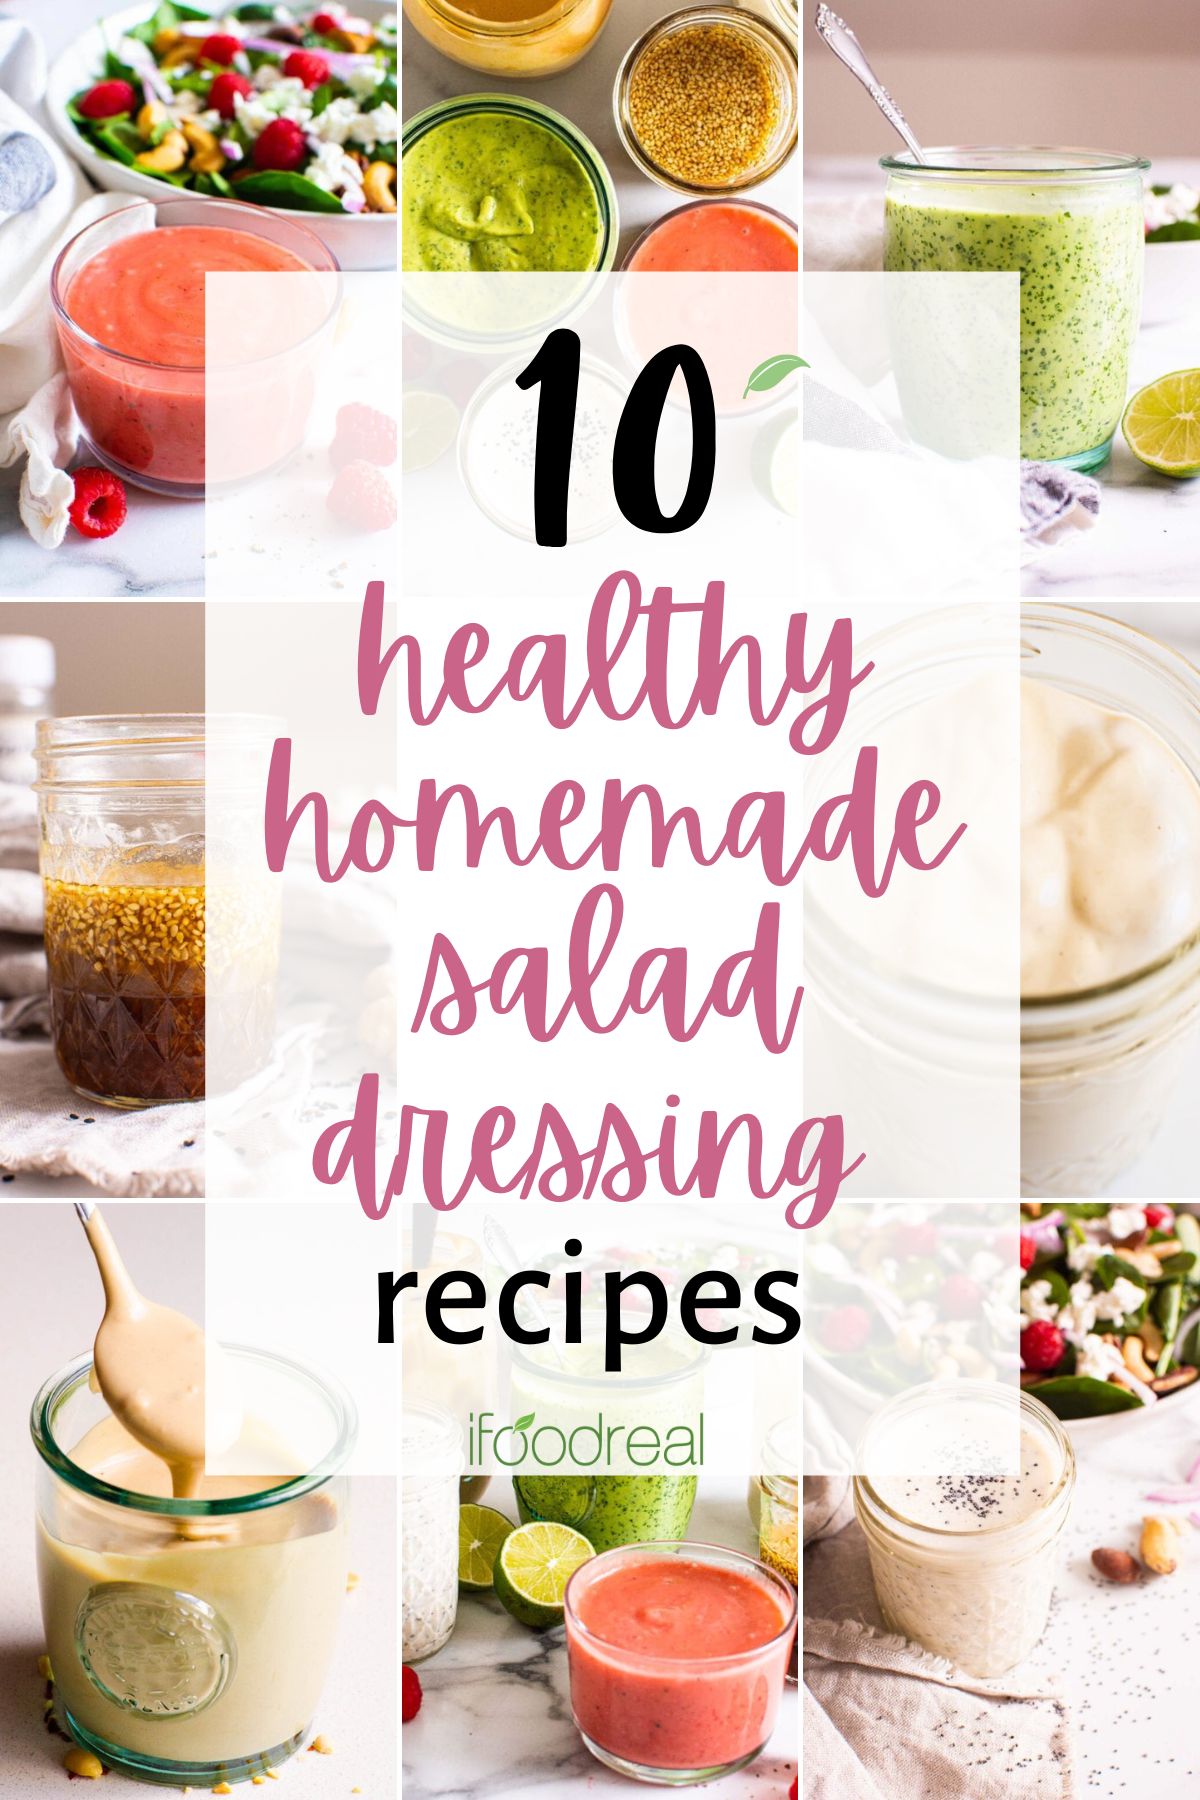 A collage of healthy homemade salad dressings in jars and on salads.